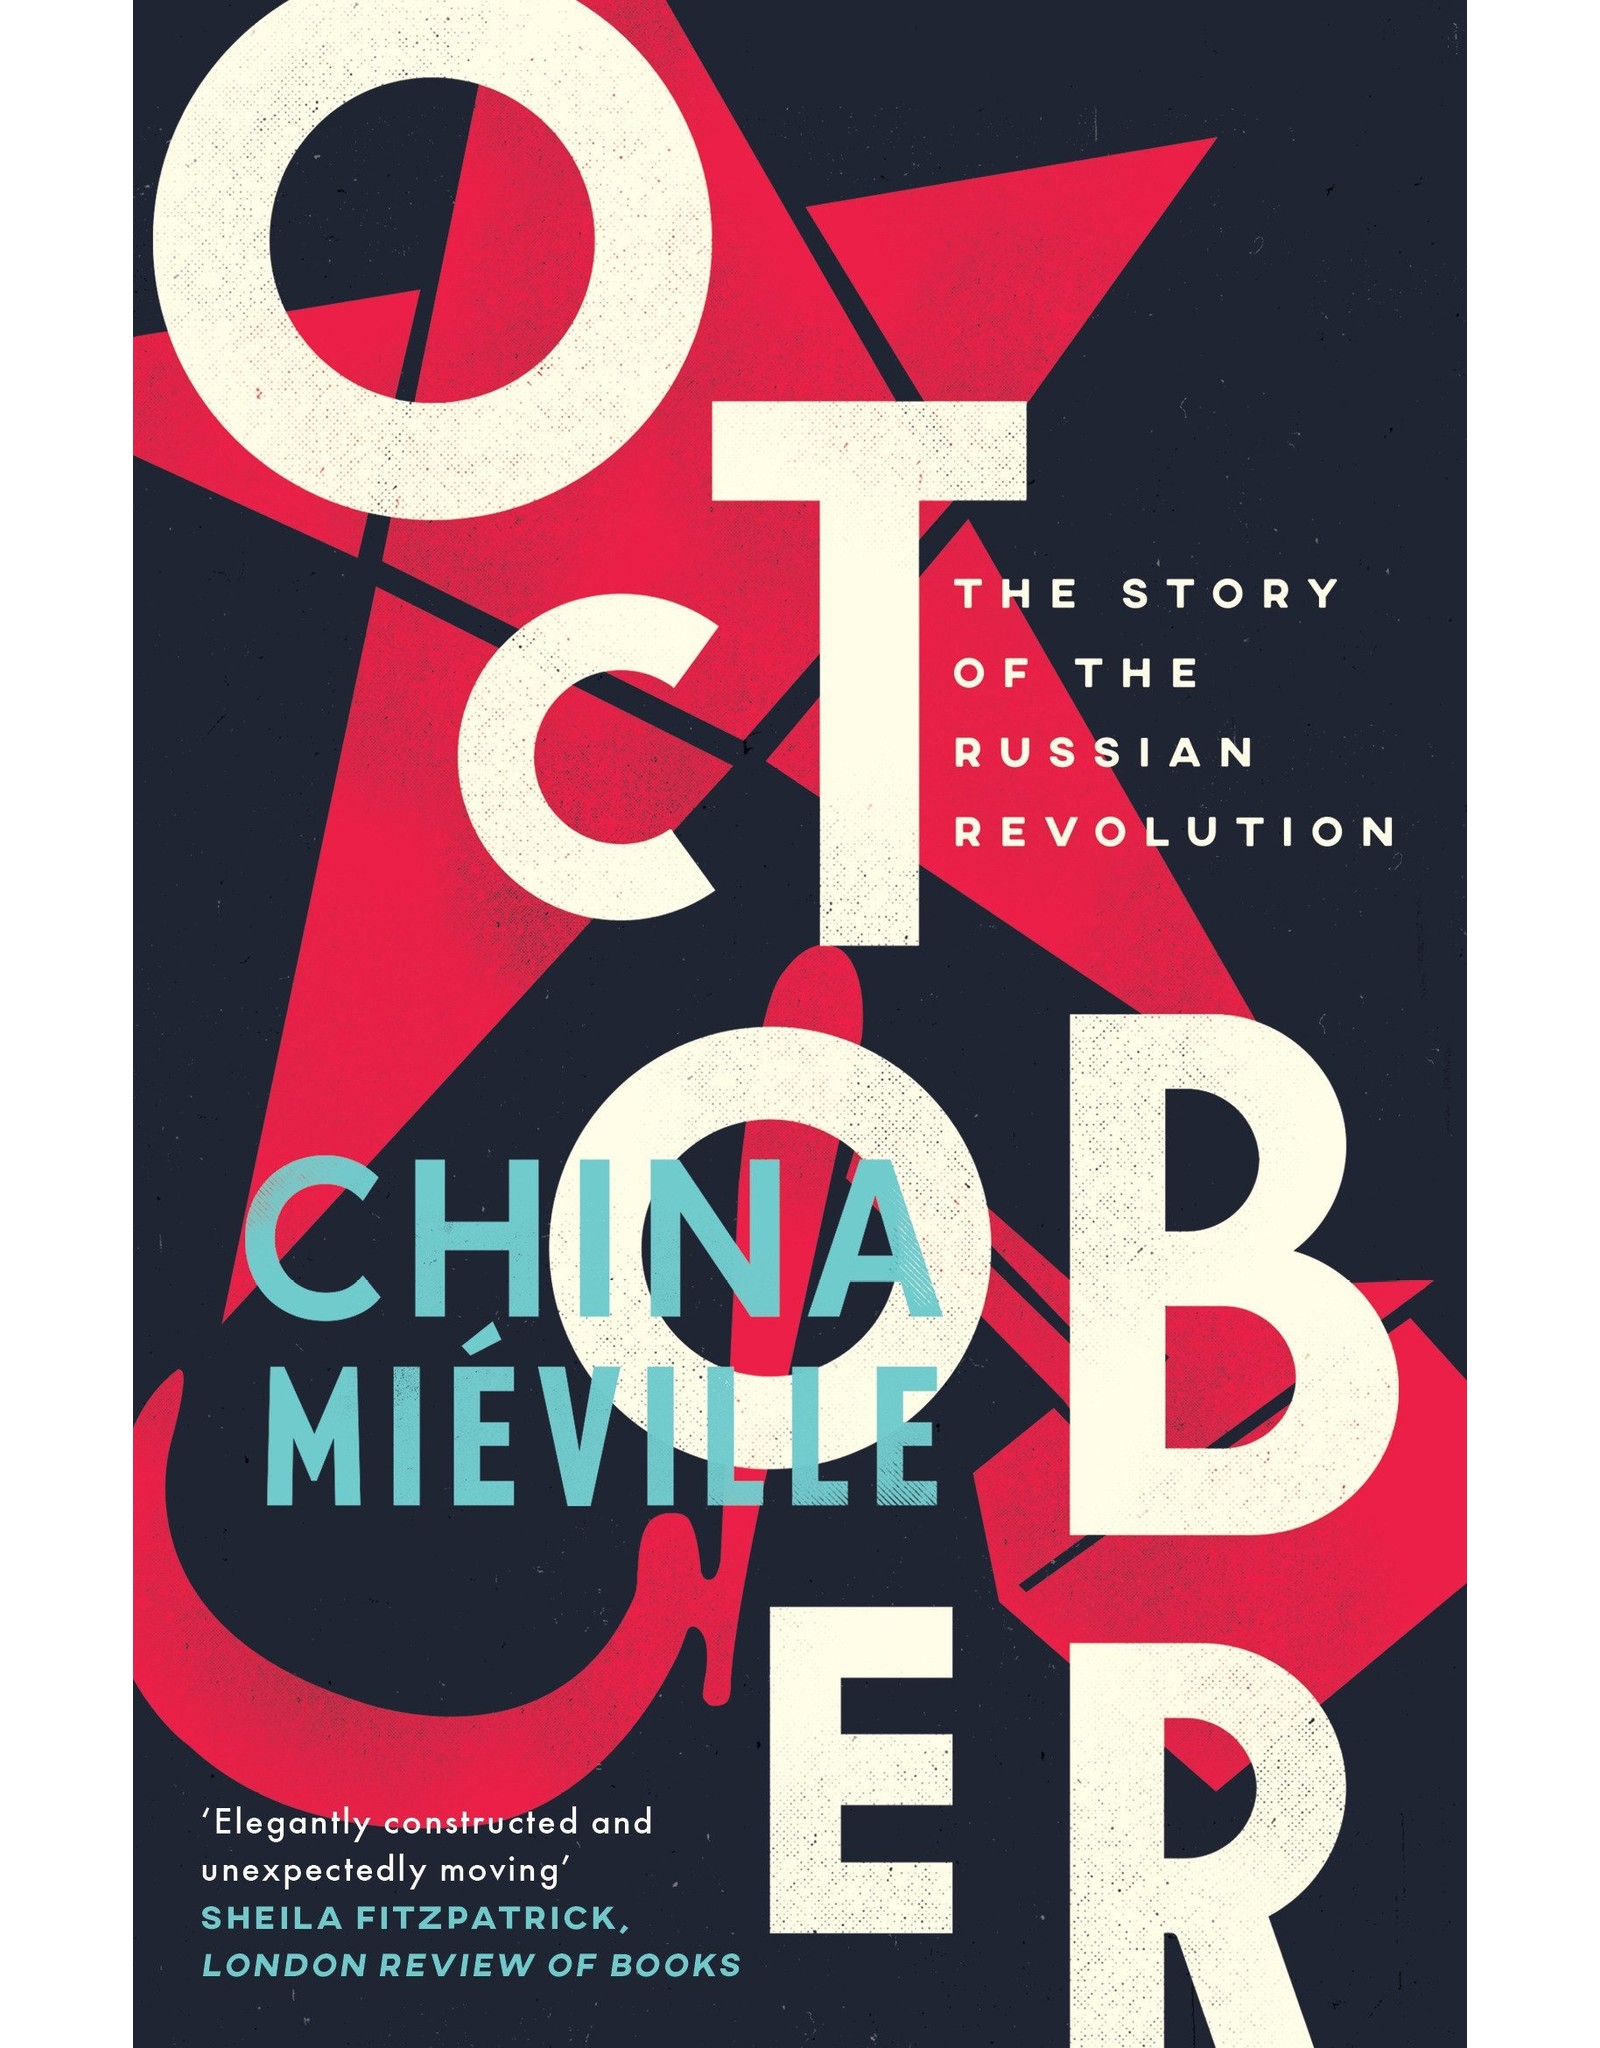 Literature October: The Story of the Russian Revolution